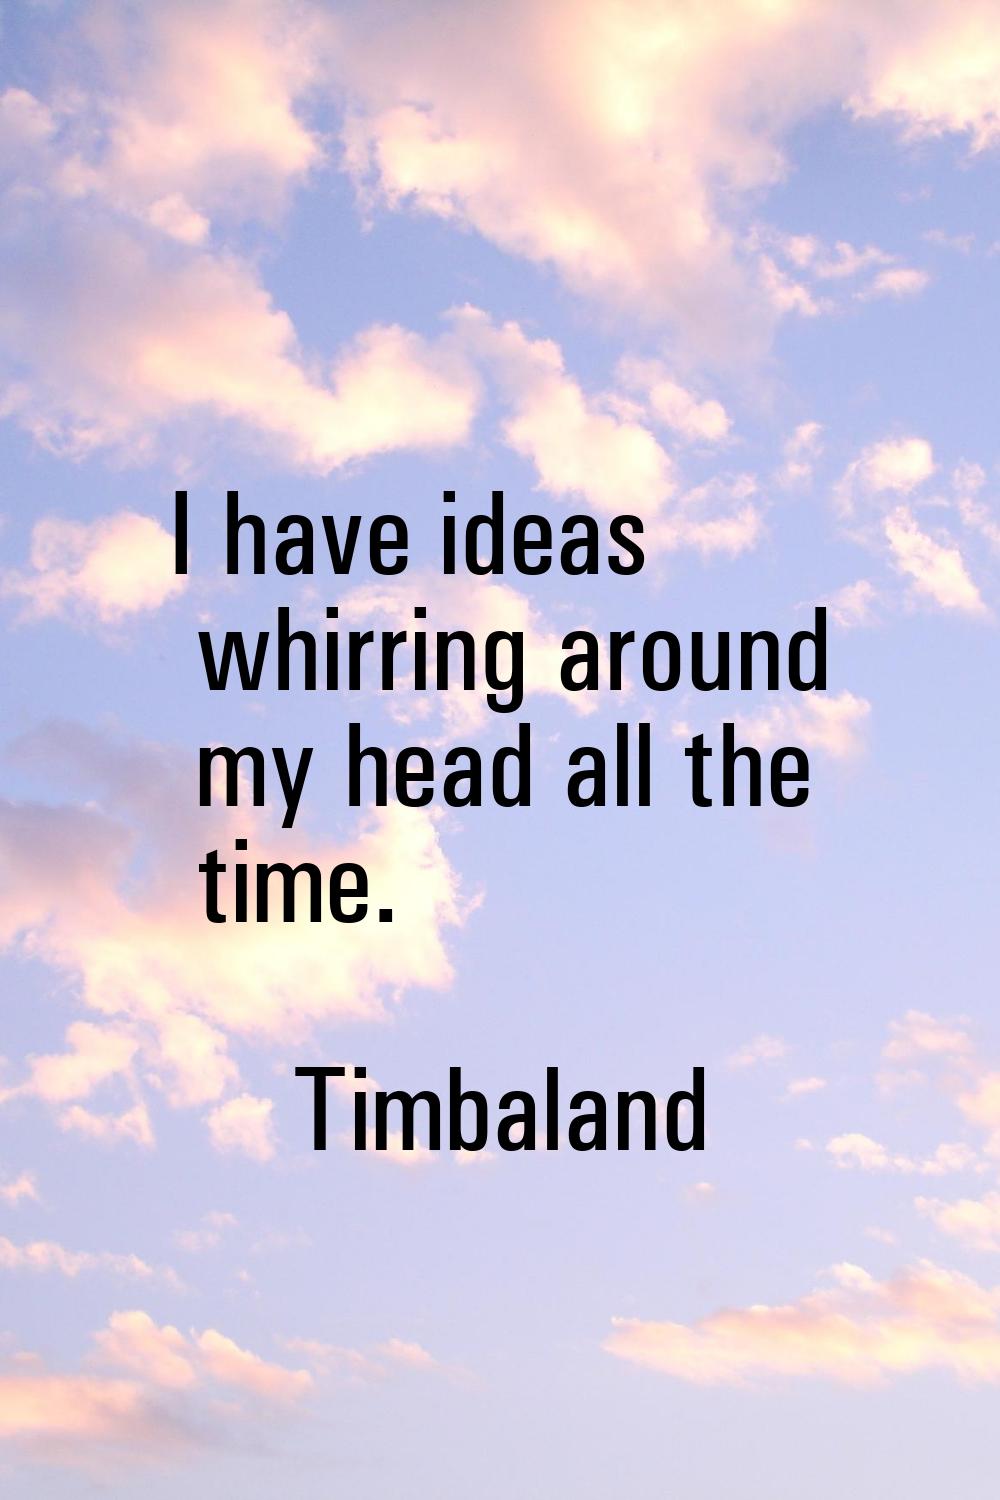 I have ideas whirring around my head all the time.